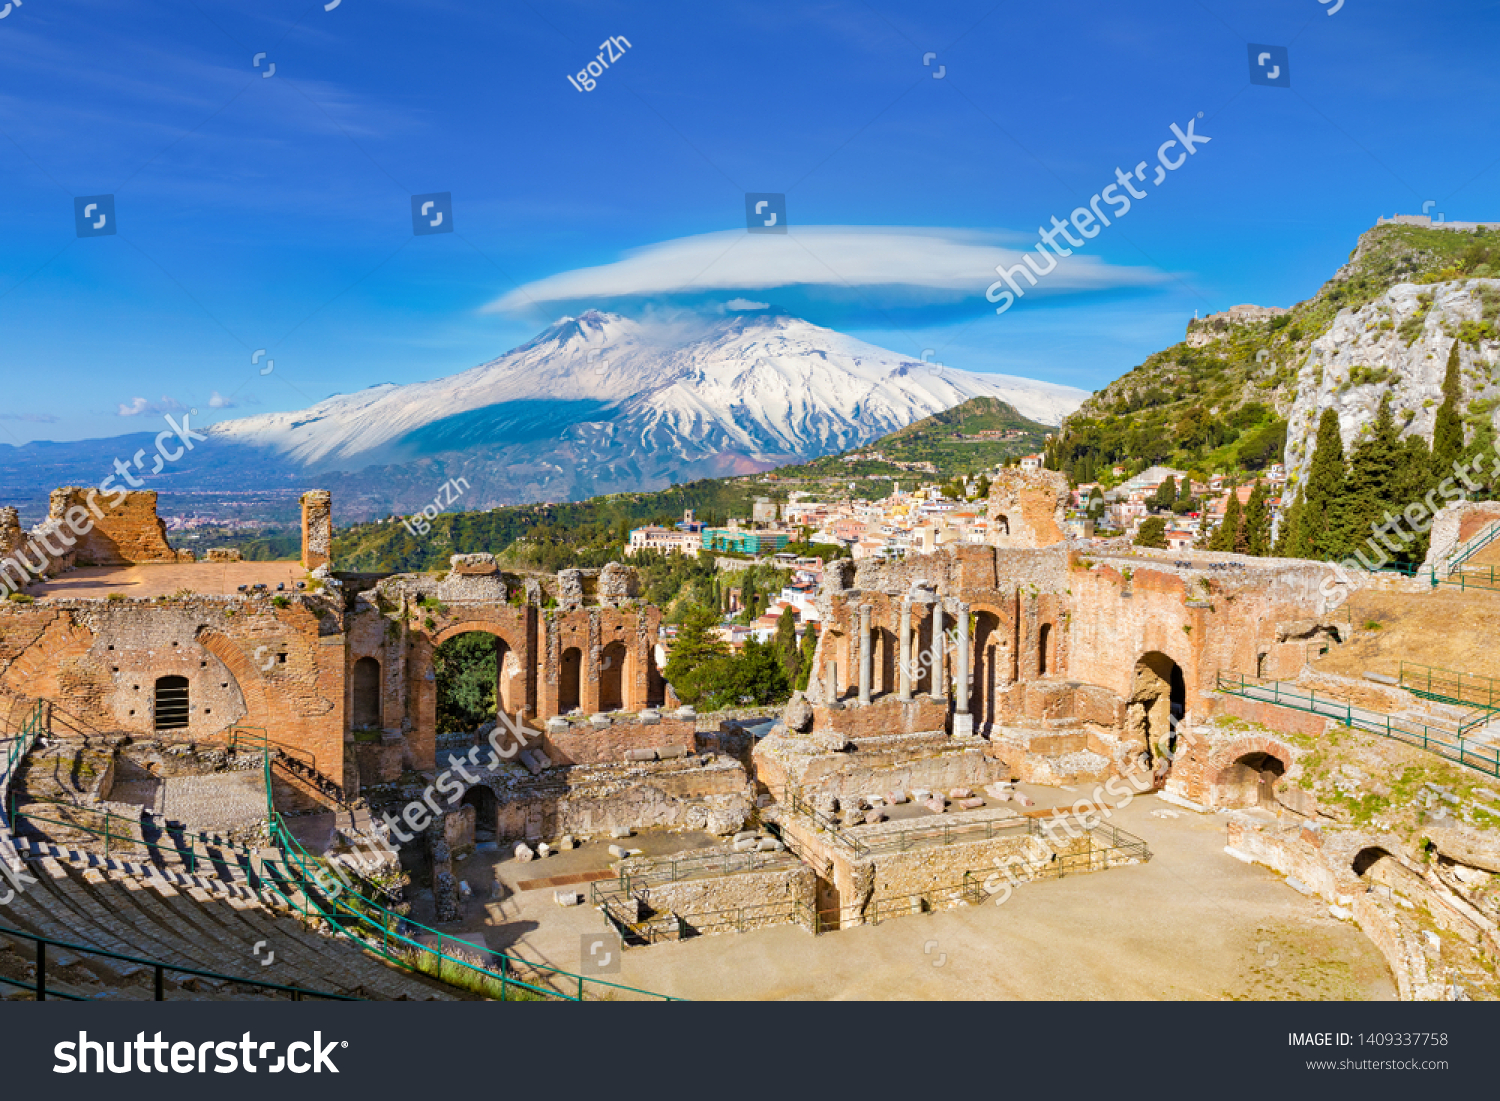 Ruins of Ancient Greek theatre in Taormina on background of Etna Volcano, Italy. Taormina located in Metropolitan City of Messina, on east coast of island of Sicily. #1409337758